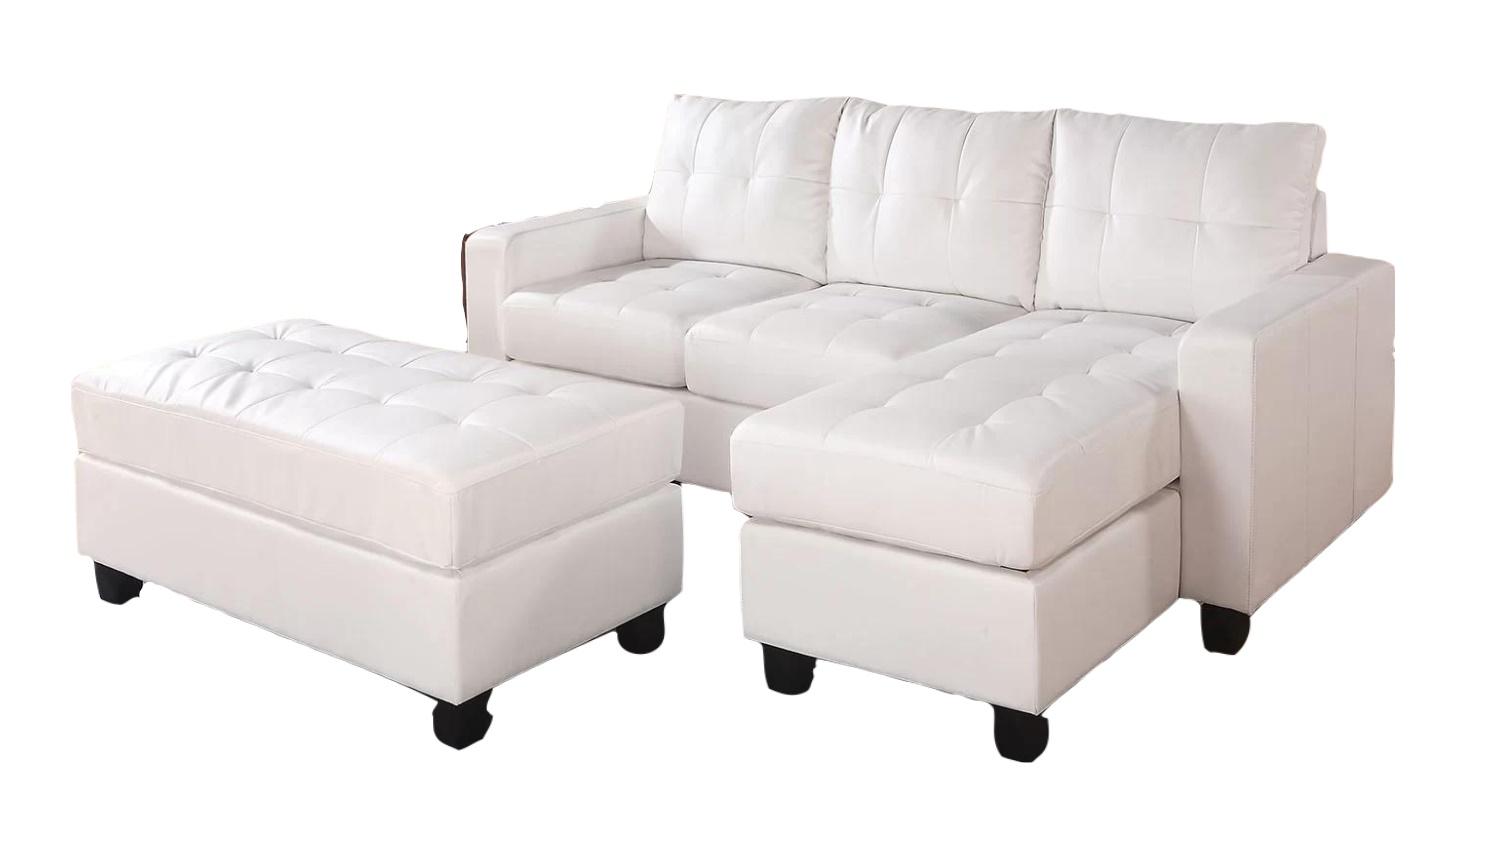 Contemporary, Modern Sectional w/ Ottoman Lyssa 51210-3pcs in White Leather Match